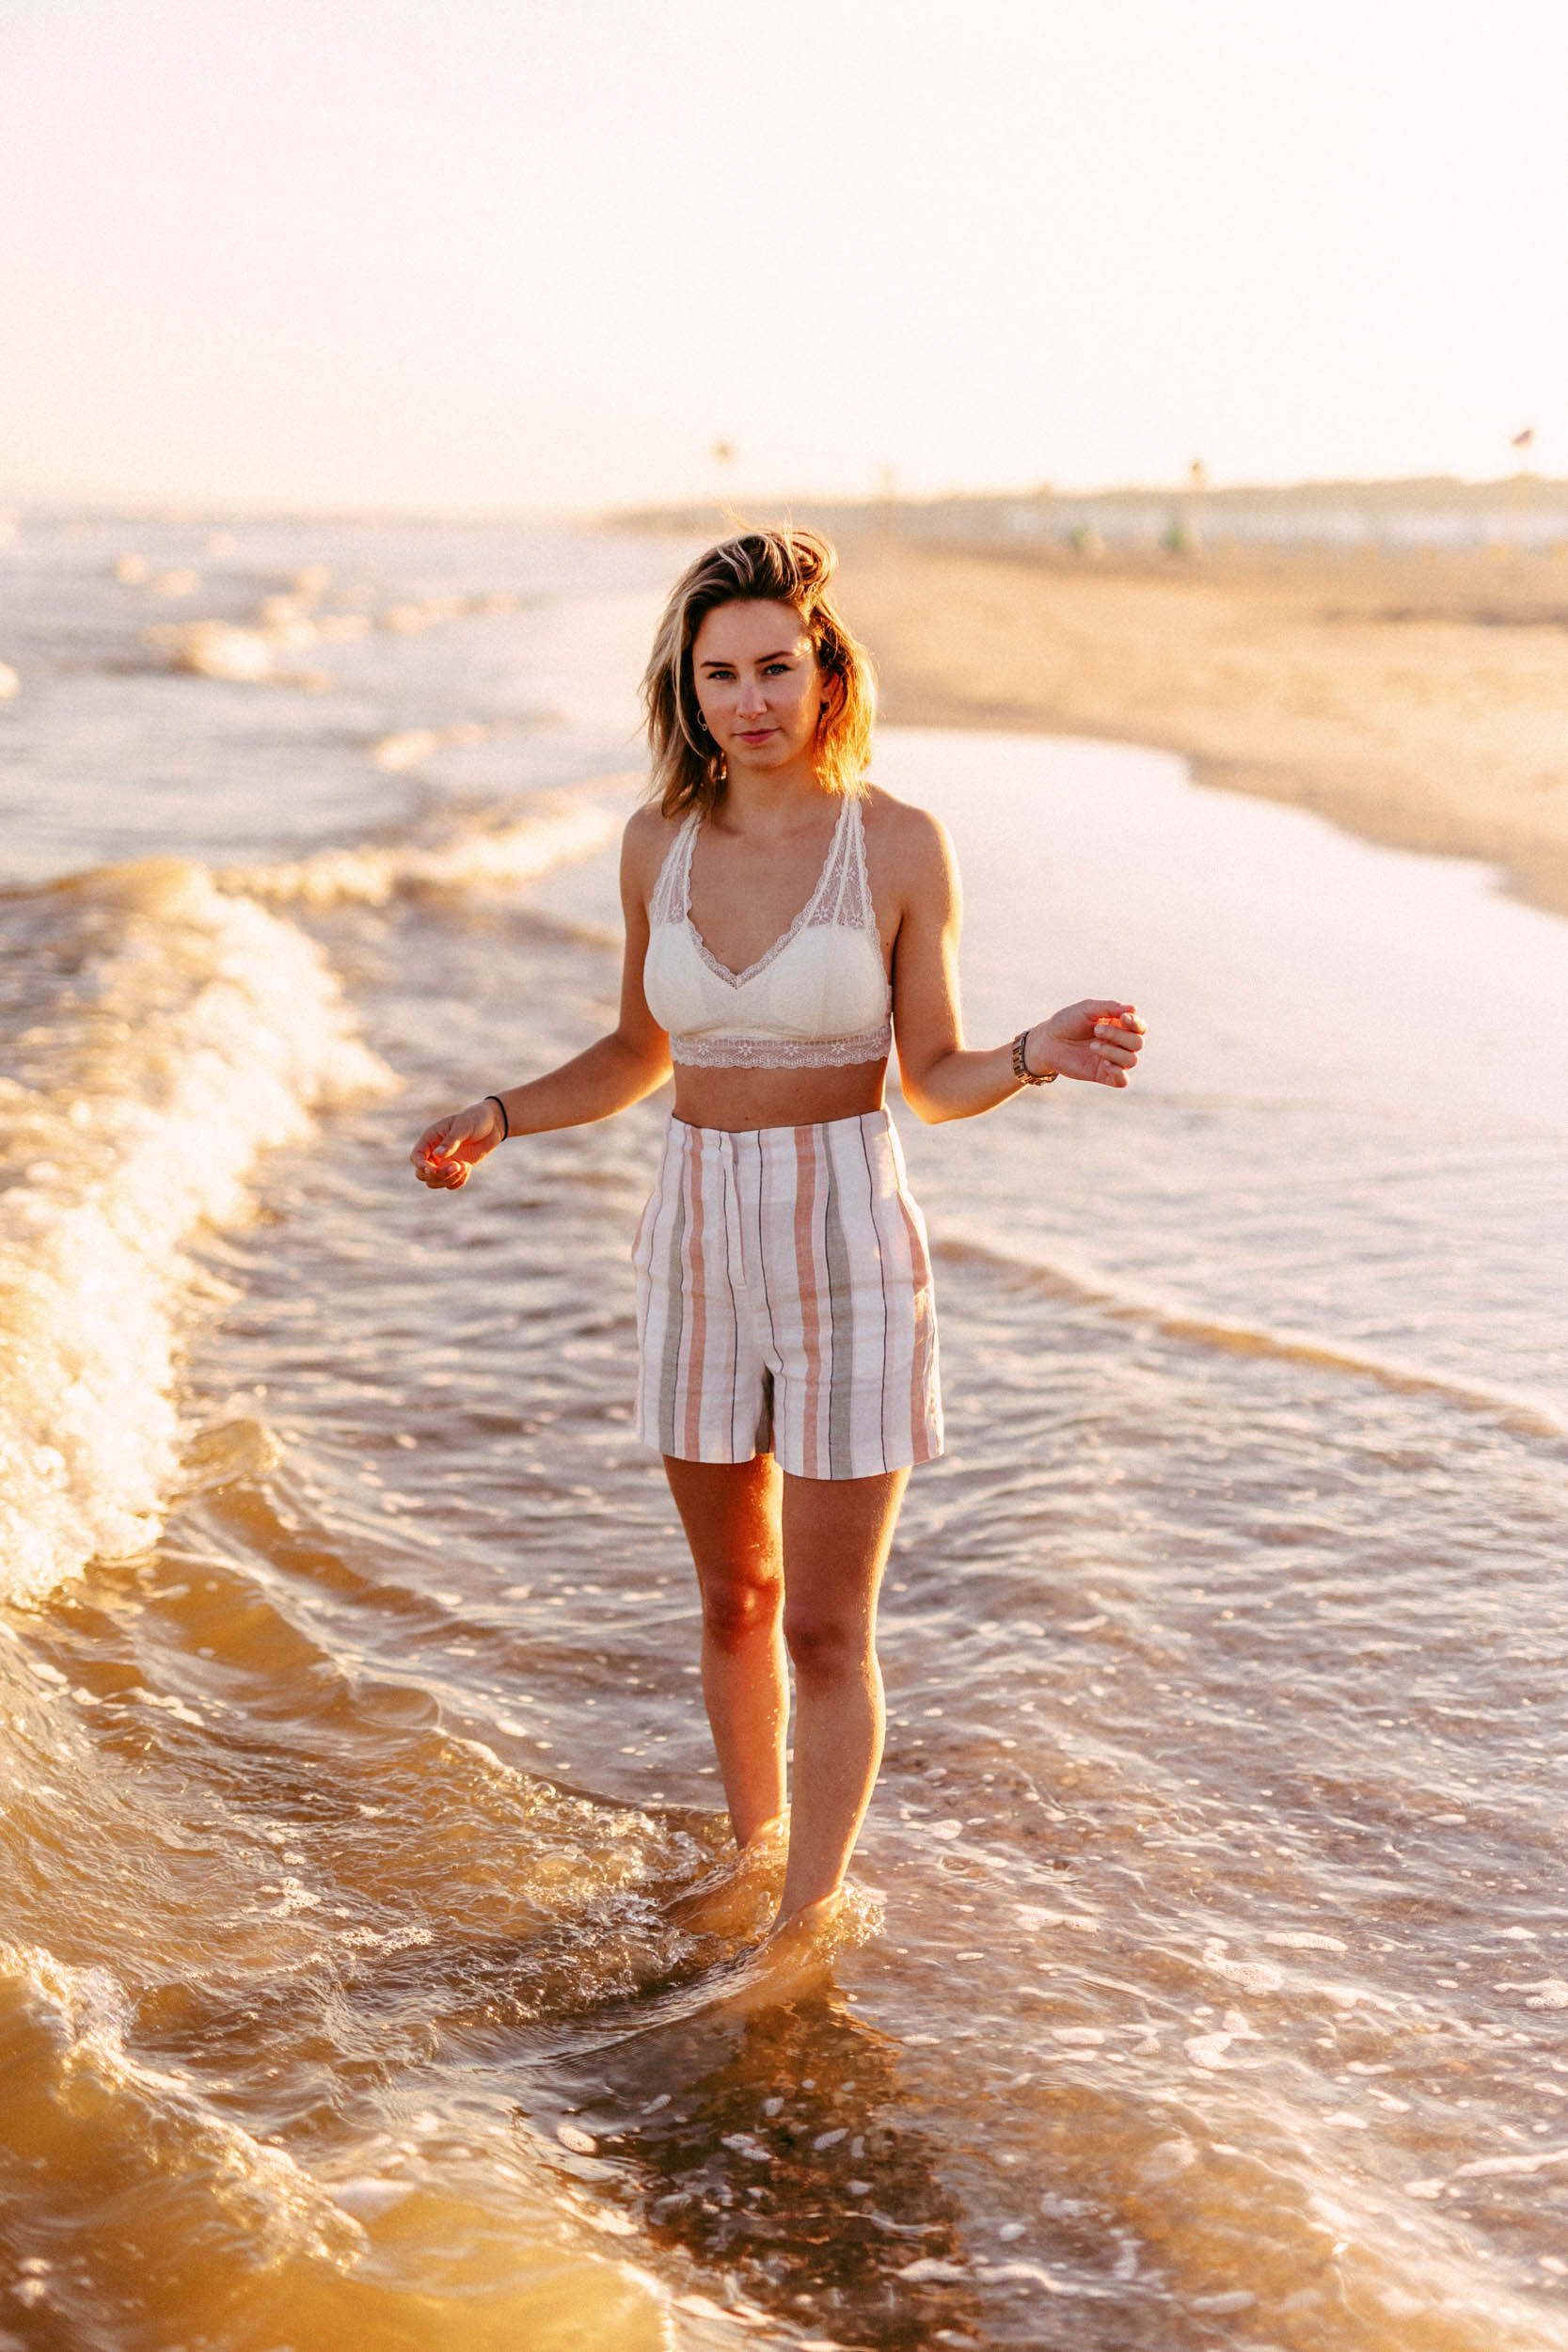 A woman standing on a beach, dressed in shorts and a striped top, captured in beautiful photographs.